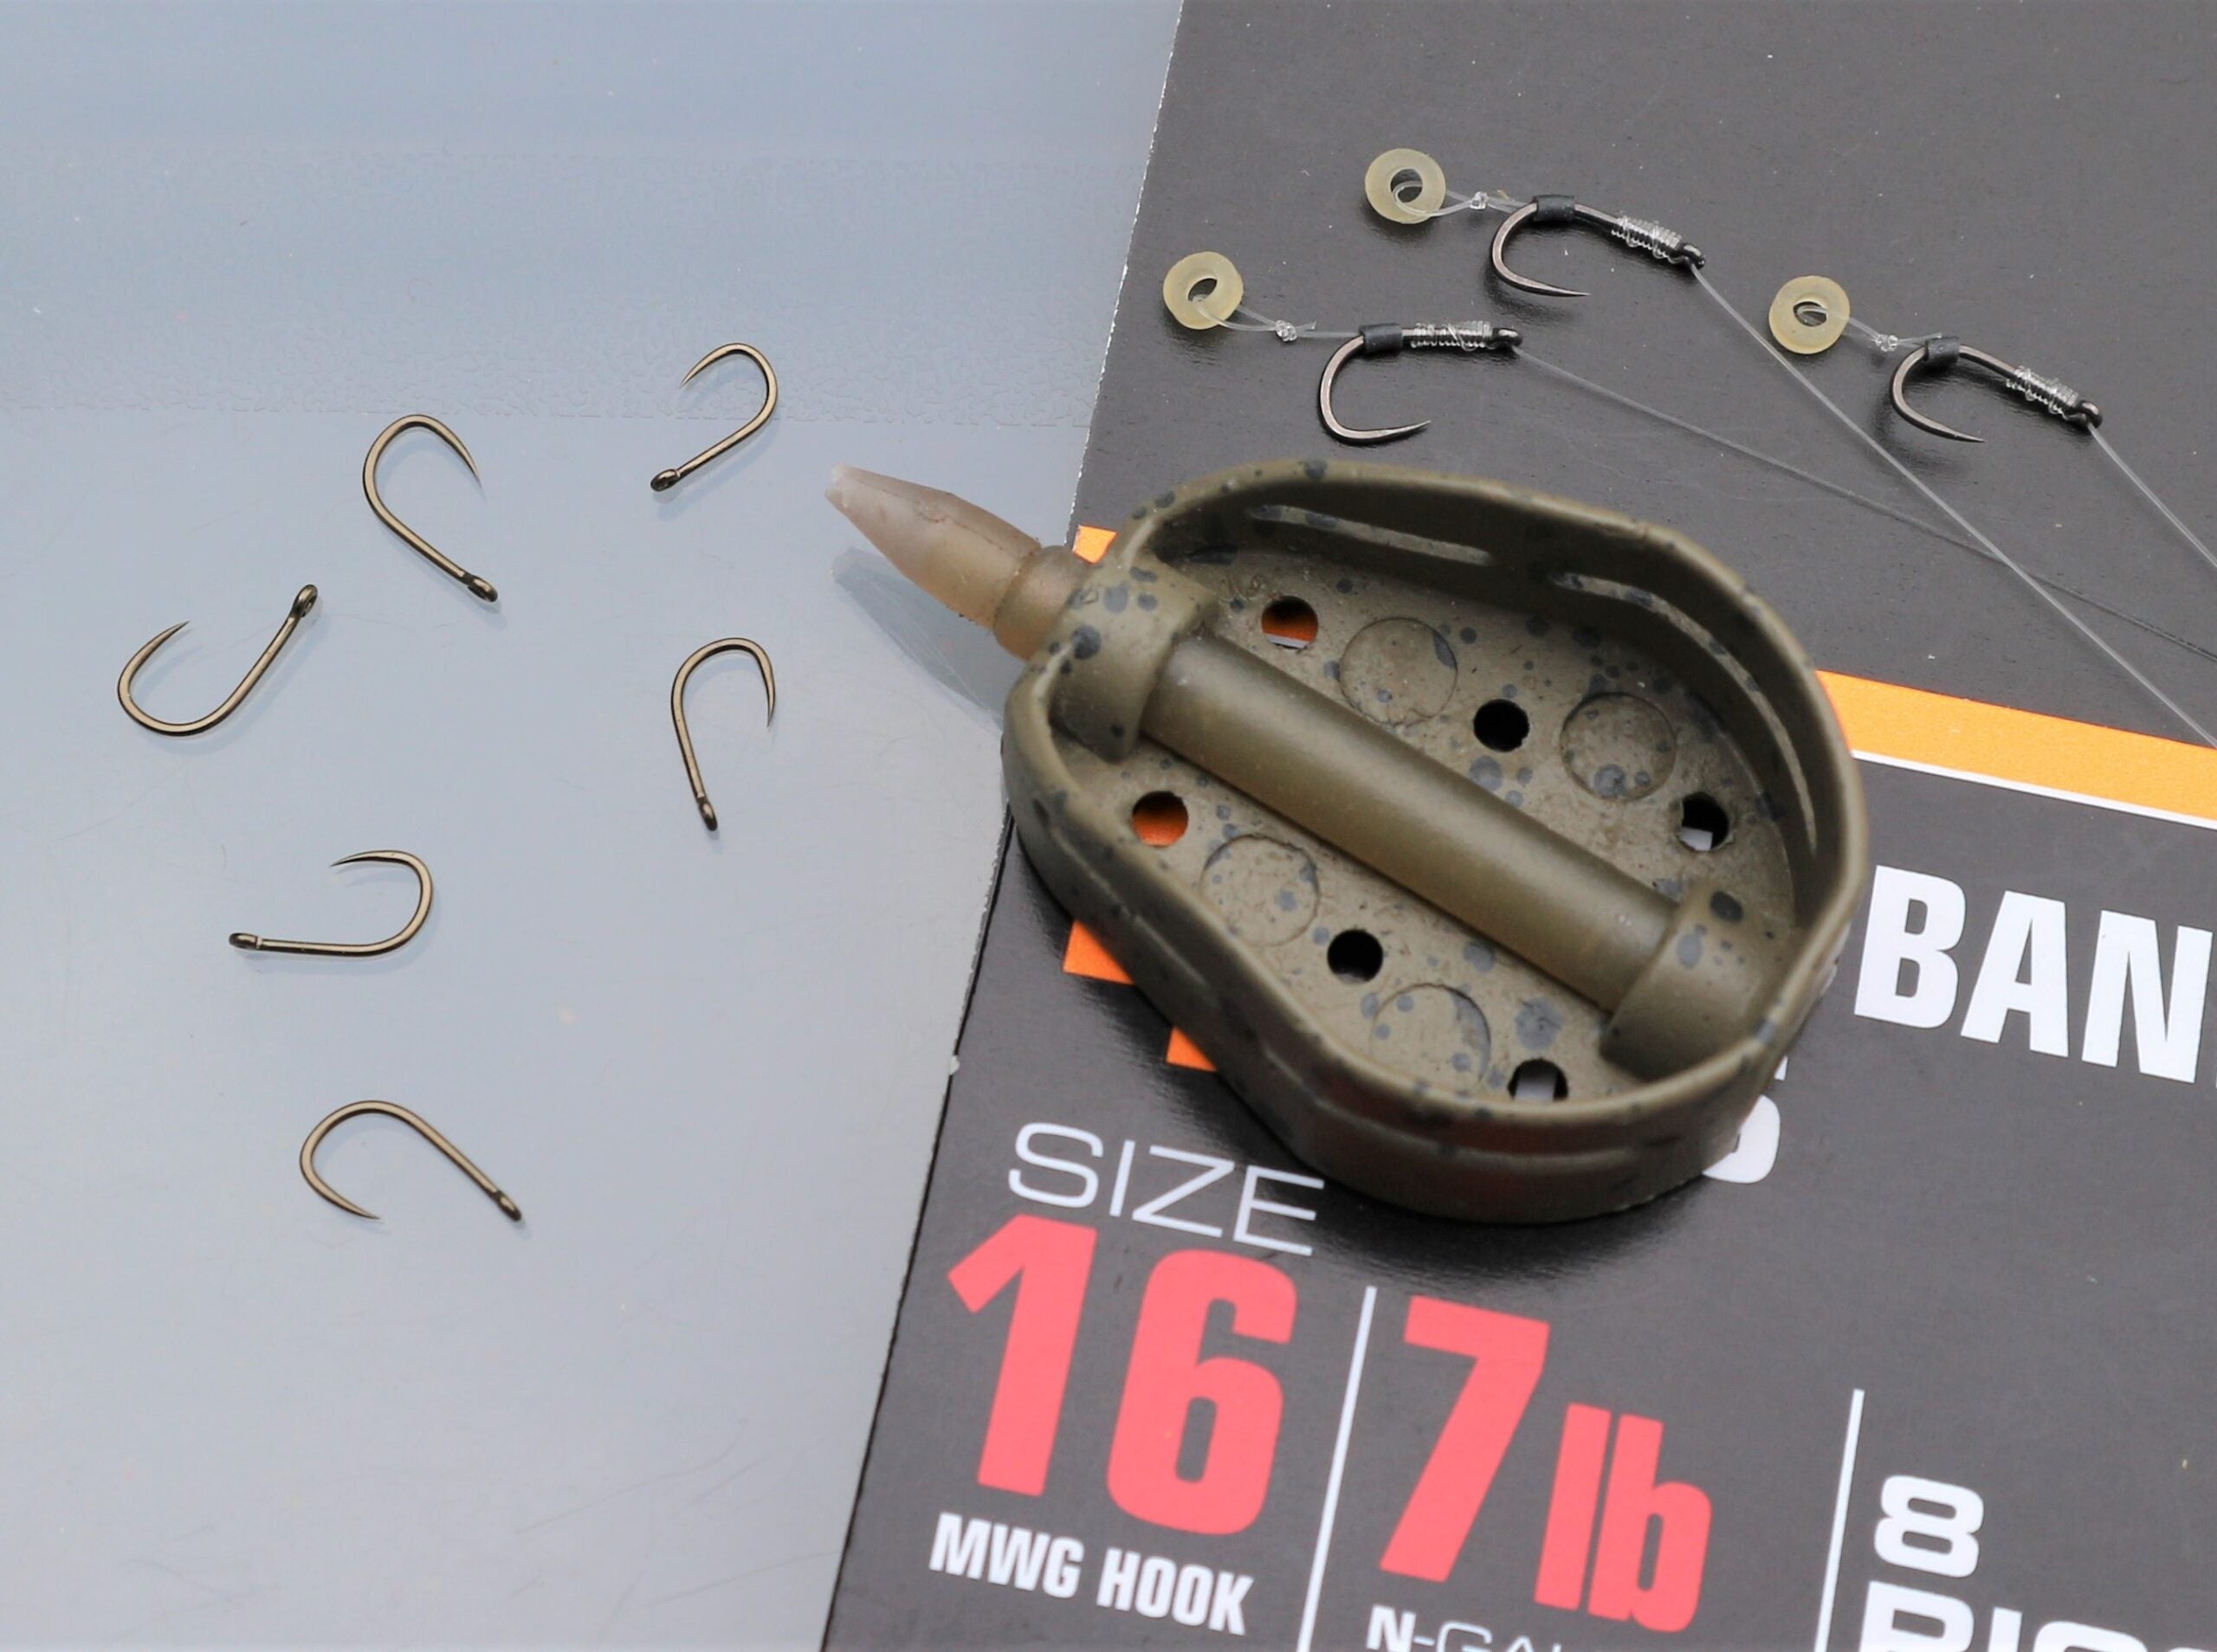 Barb or Barbless Hooks  The North American Fly Fishing Forum - sponsored  by Thomas Turner